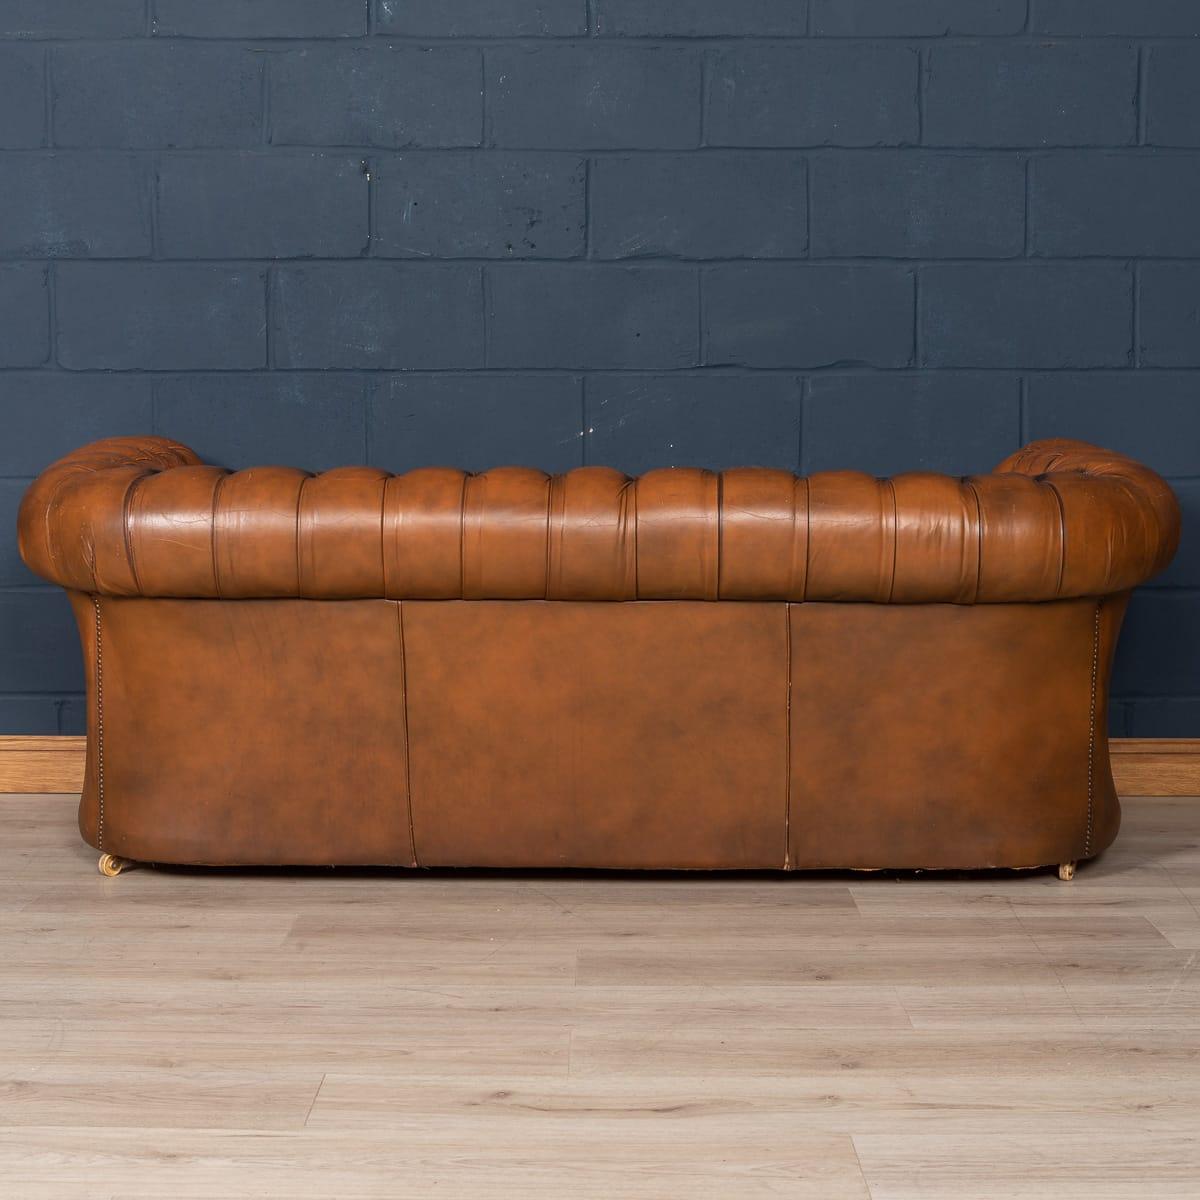 English 20th Century Chesterfield Three-Seat Leather Sofa with Button Down Seats